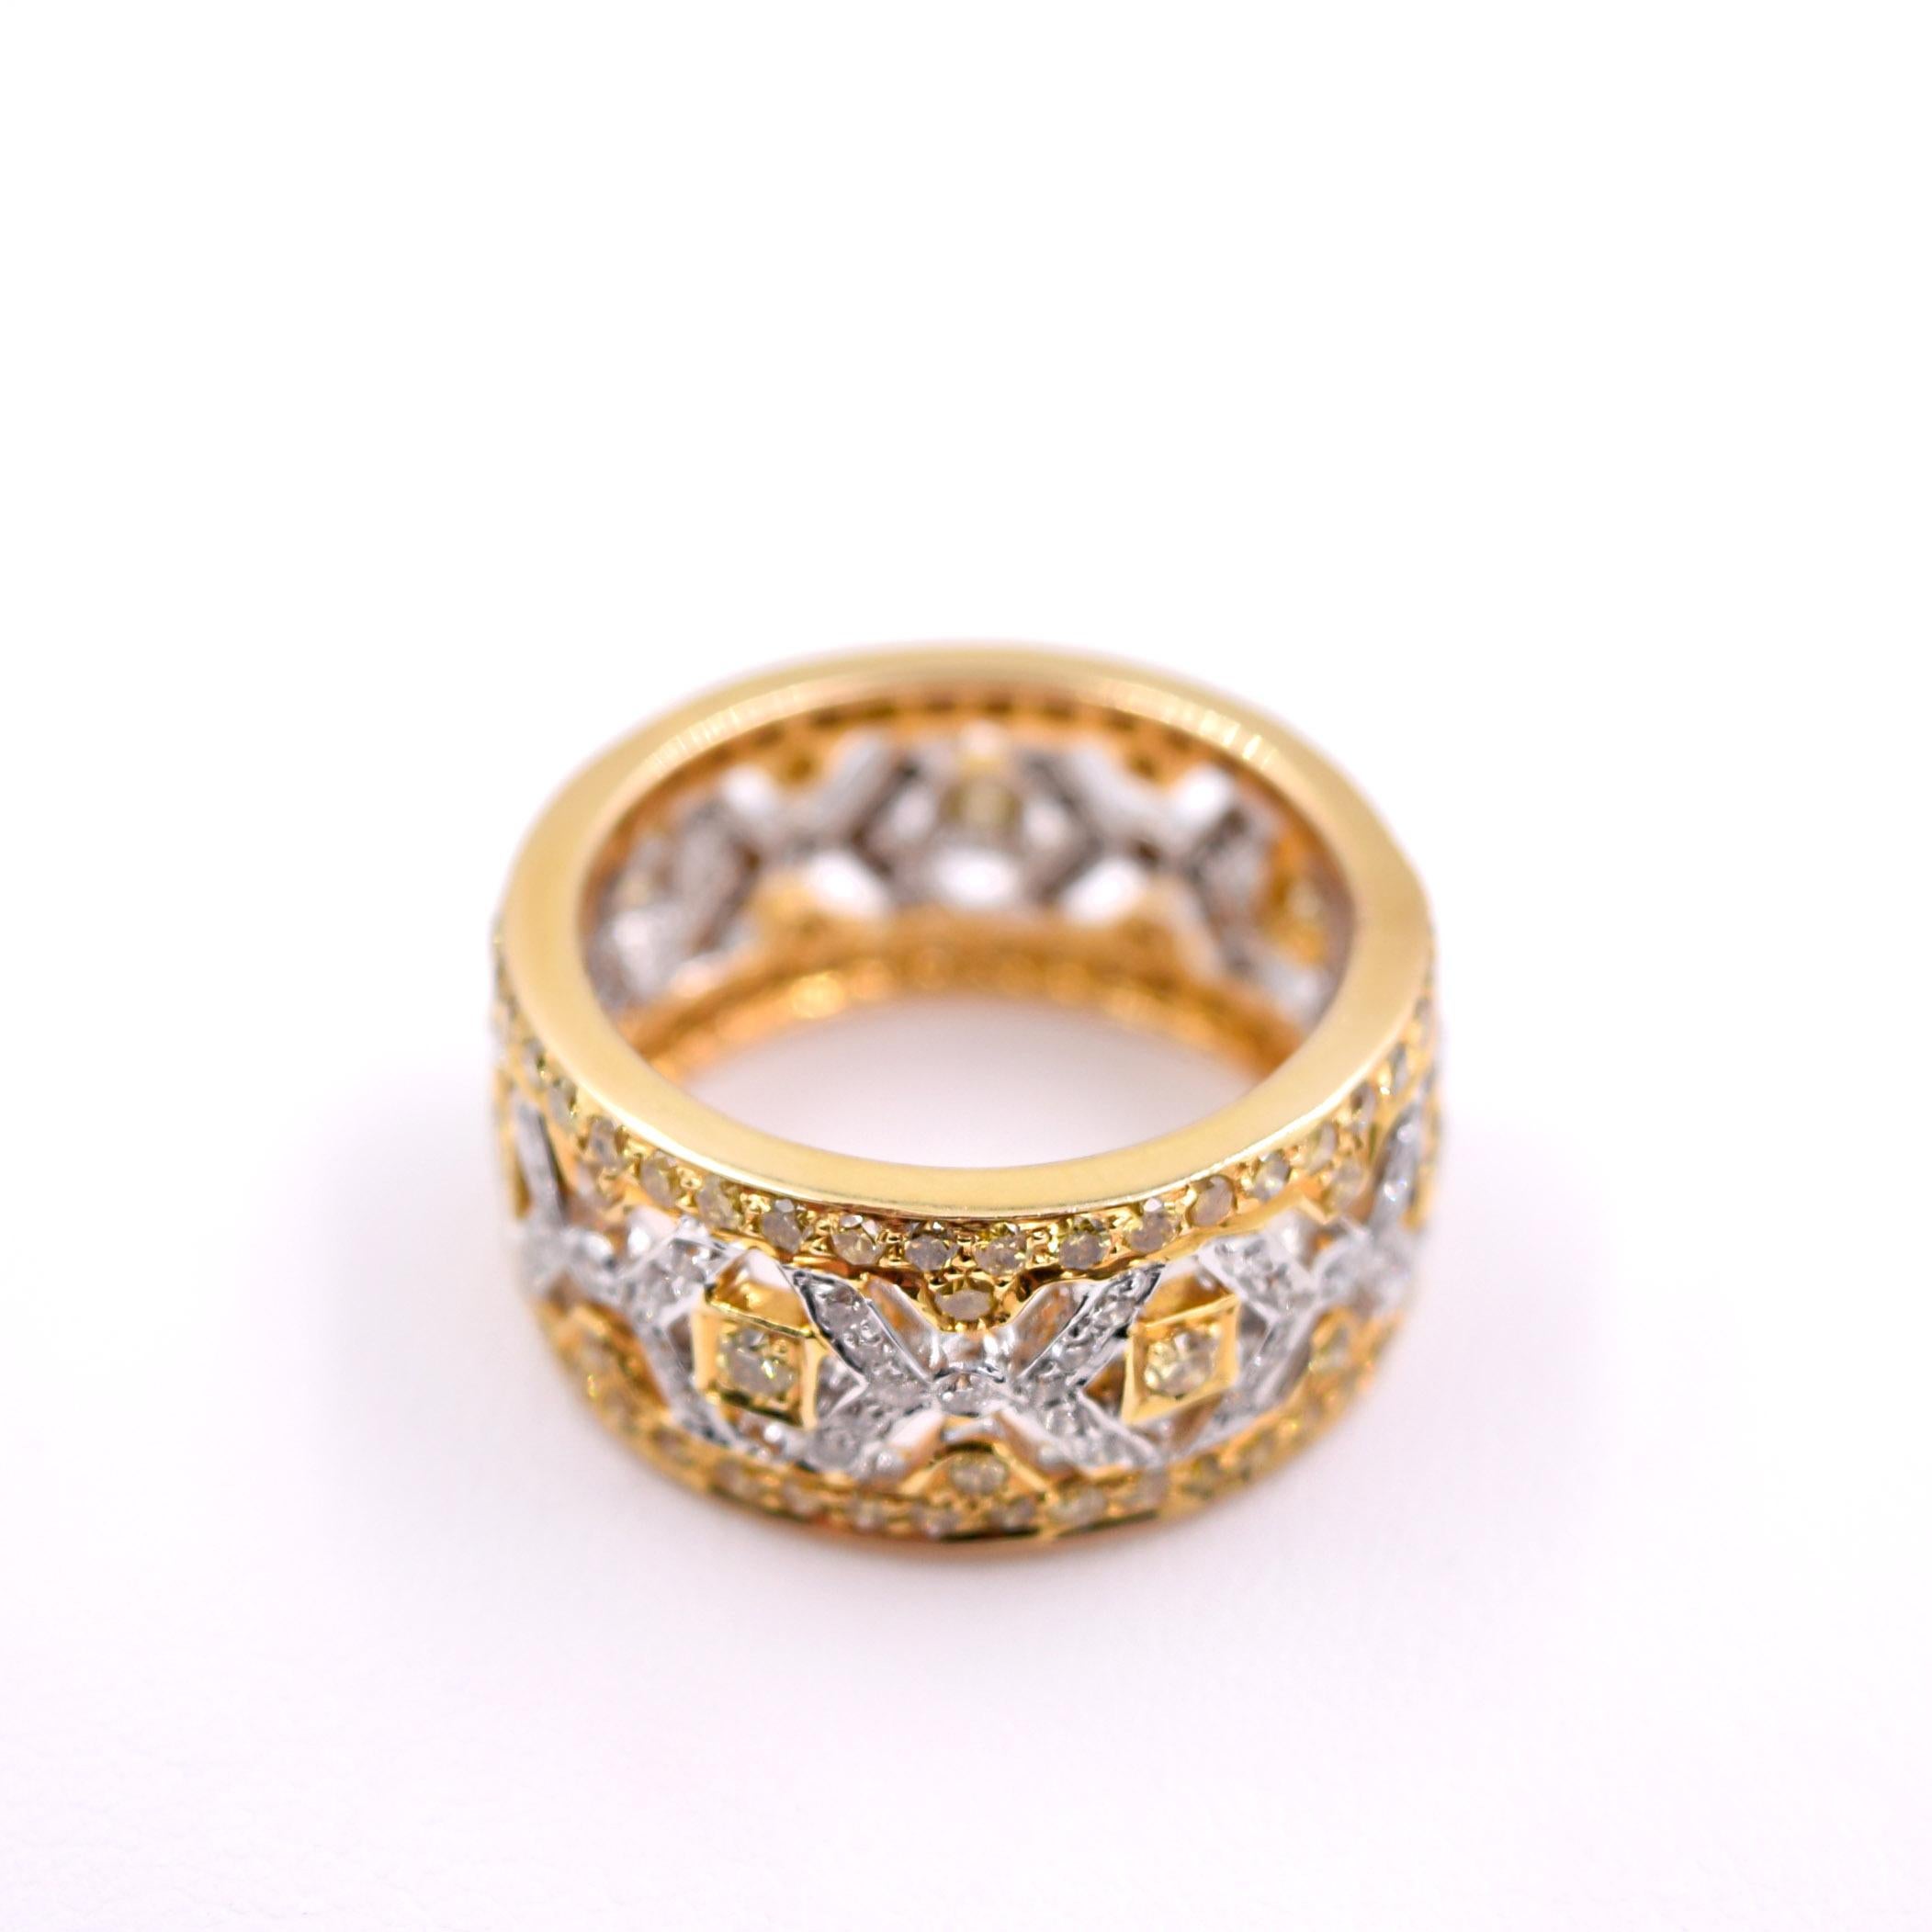 Beautiful diamond band by Sethi Couture.
White and yellow diamonds equal 2.25 Carats on 18K white and yellow gold.
Size of the ring is 8.